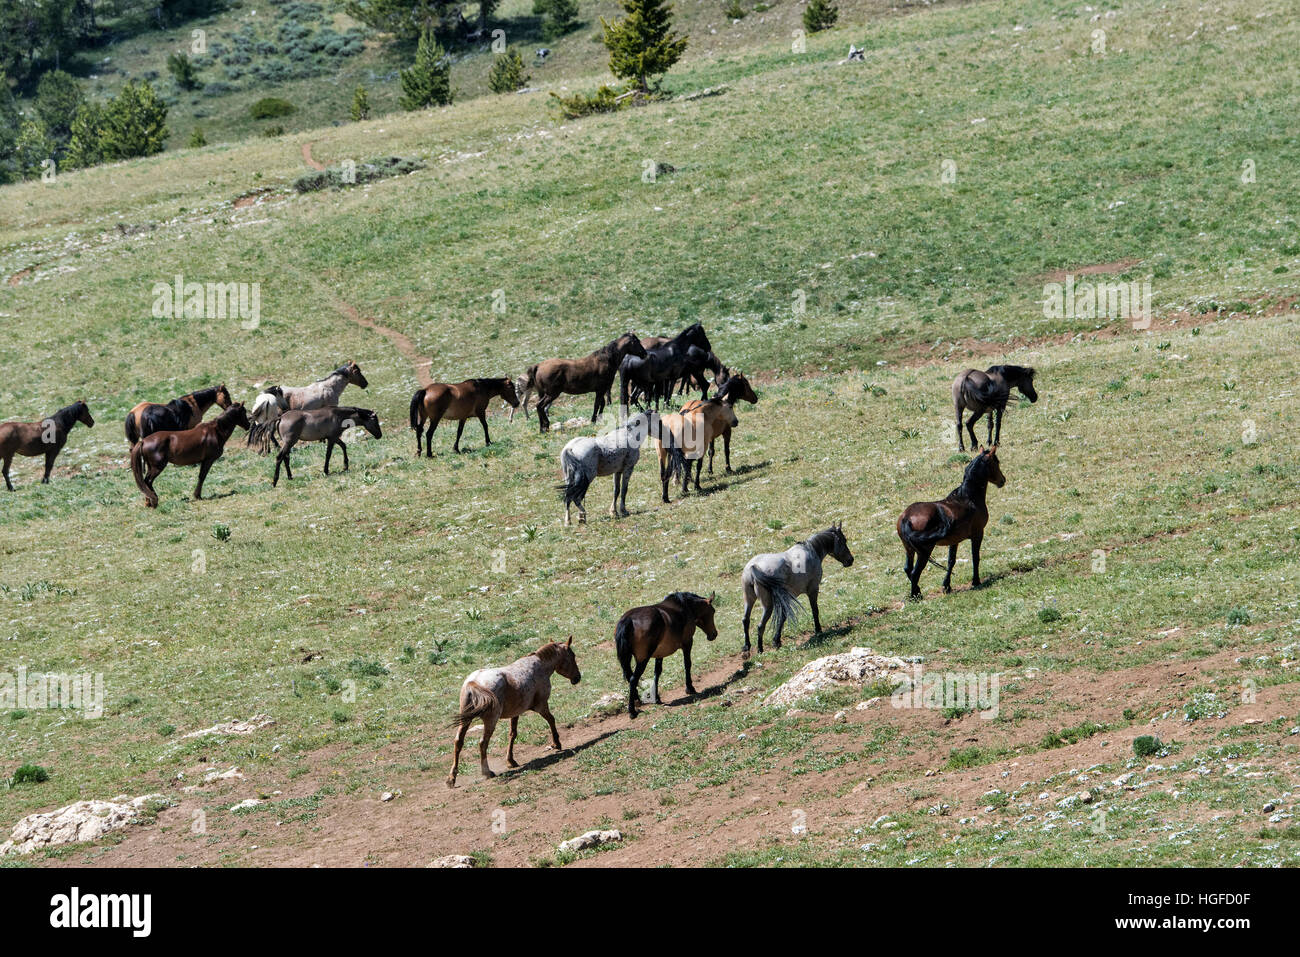 Les chevaux sauvages, Pryor Mountains Refuge Wild Horse, Montana, Wyoming, USA, Banque D'Images